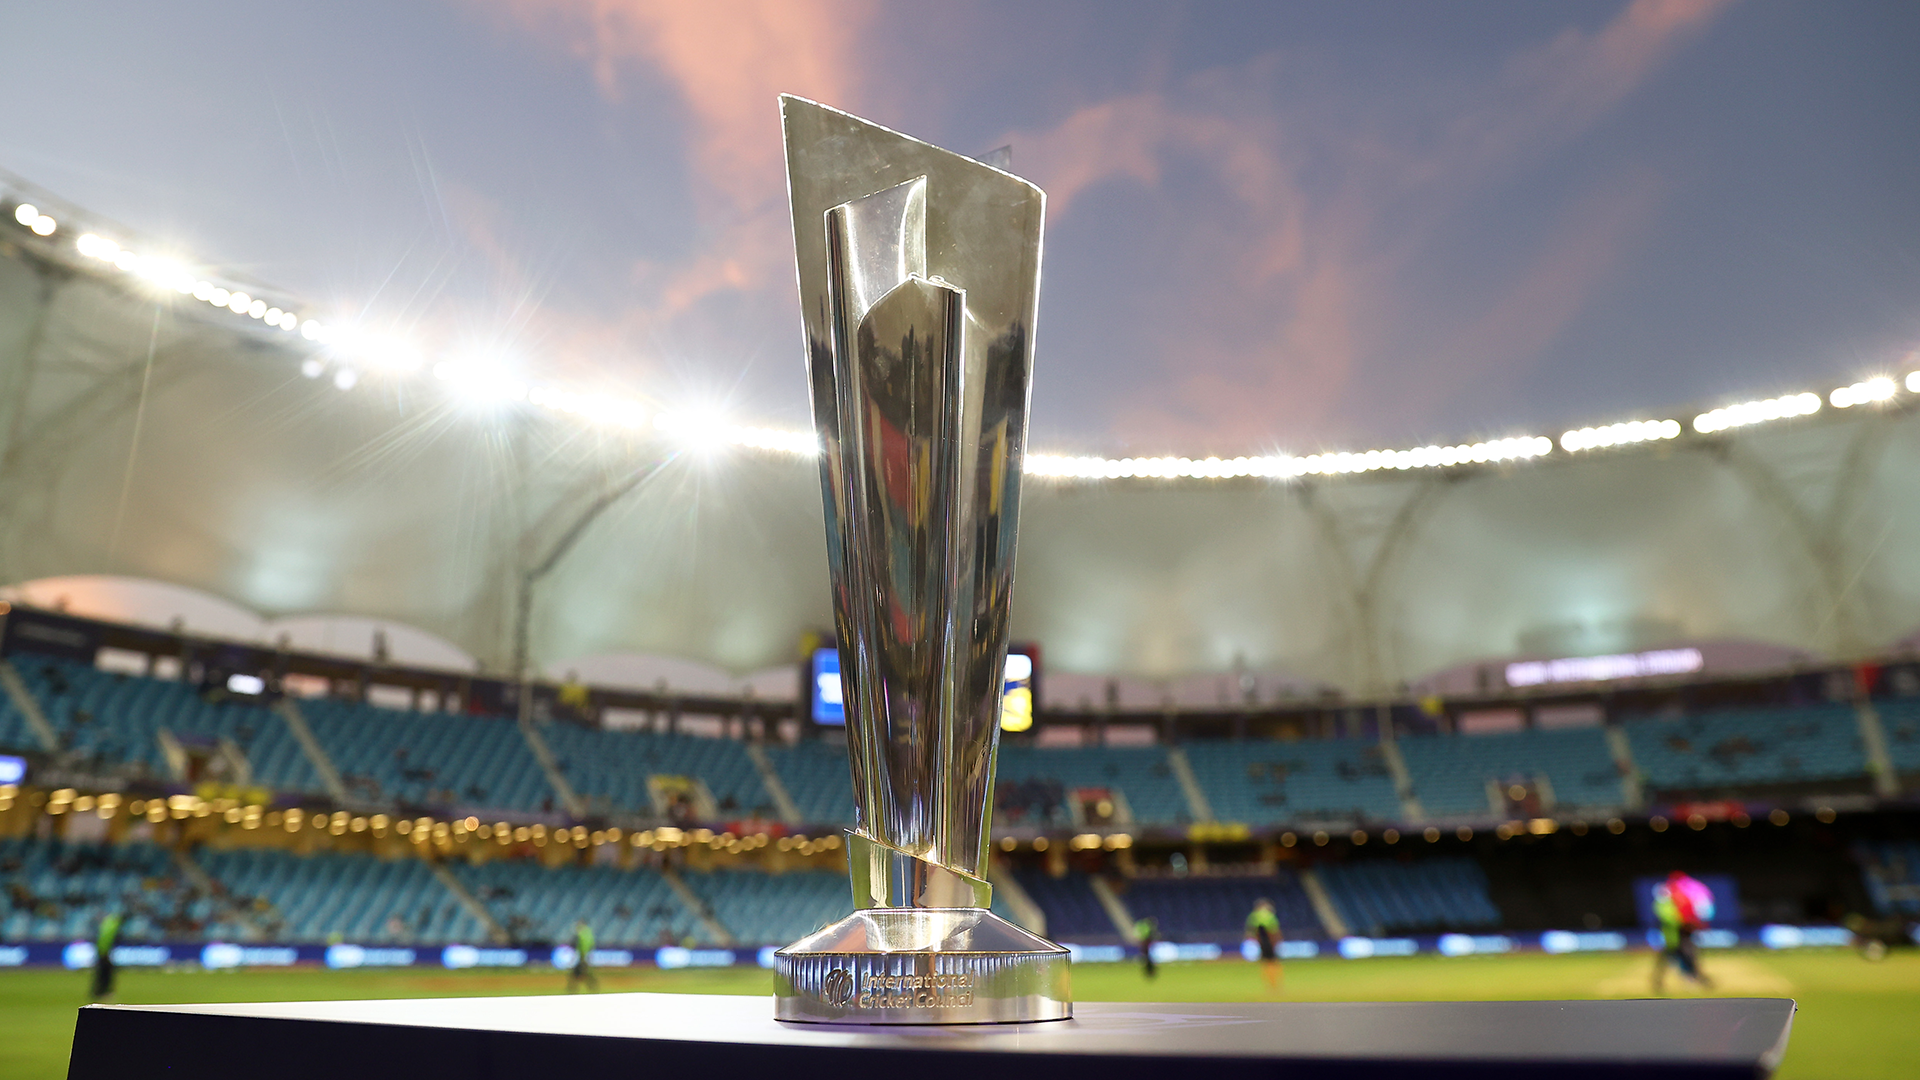 Possible That 2024 T20 World Cup Could Be Shifted From West Indies And USA Due To Infrastructure Issue- Reports 2